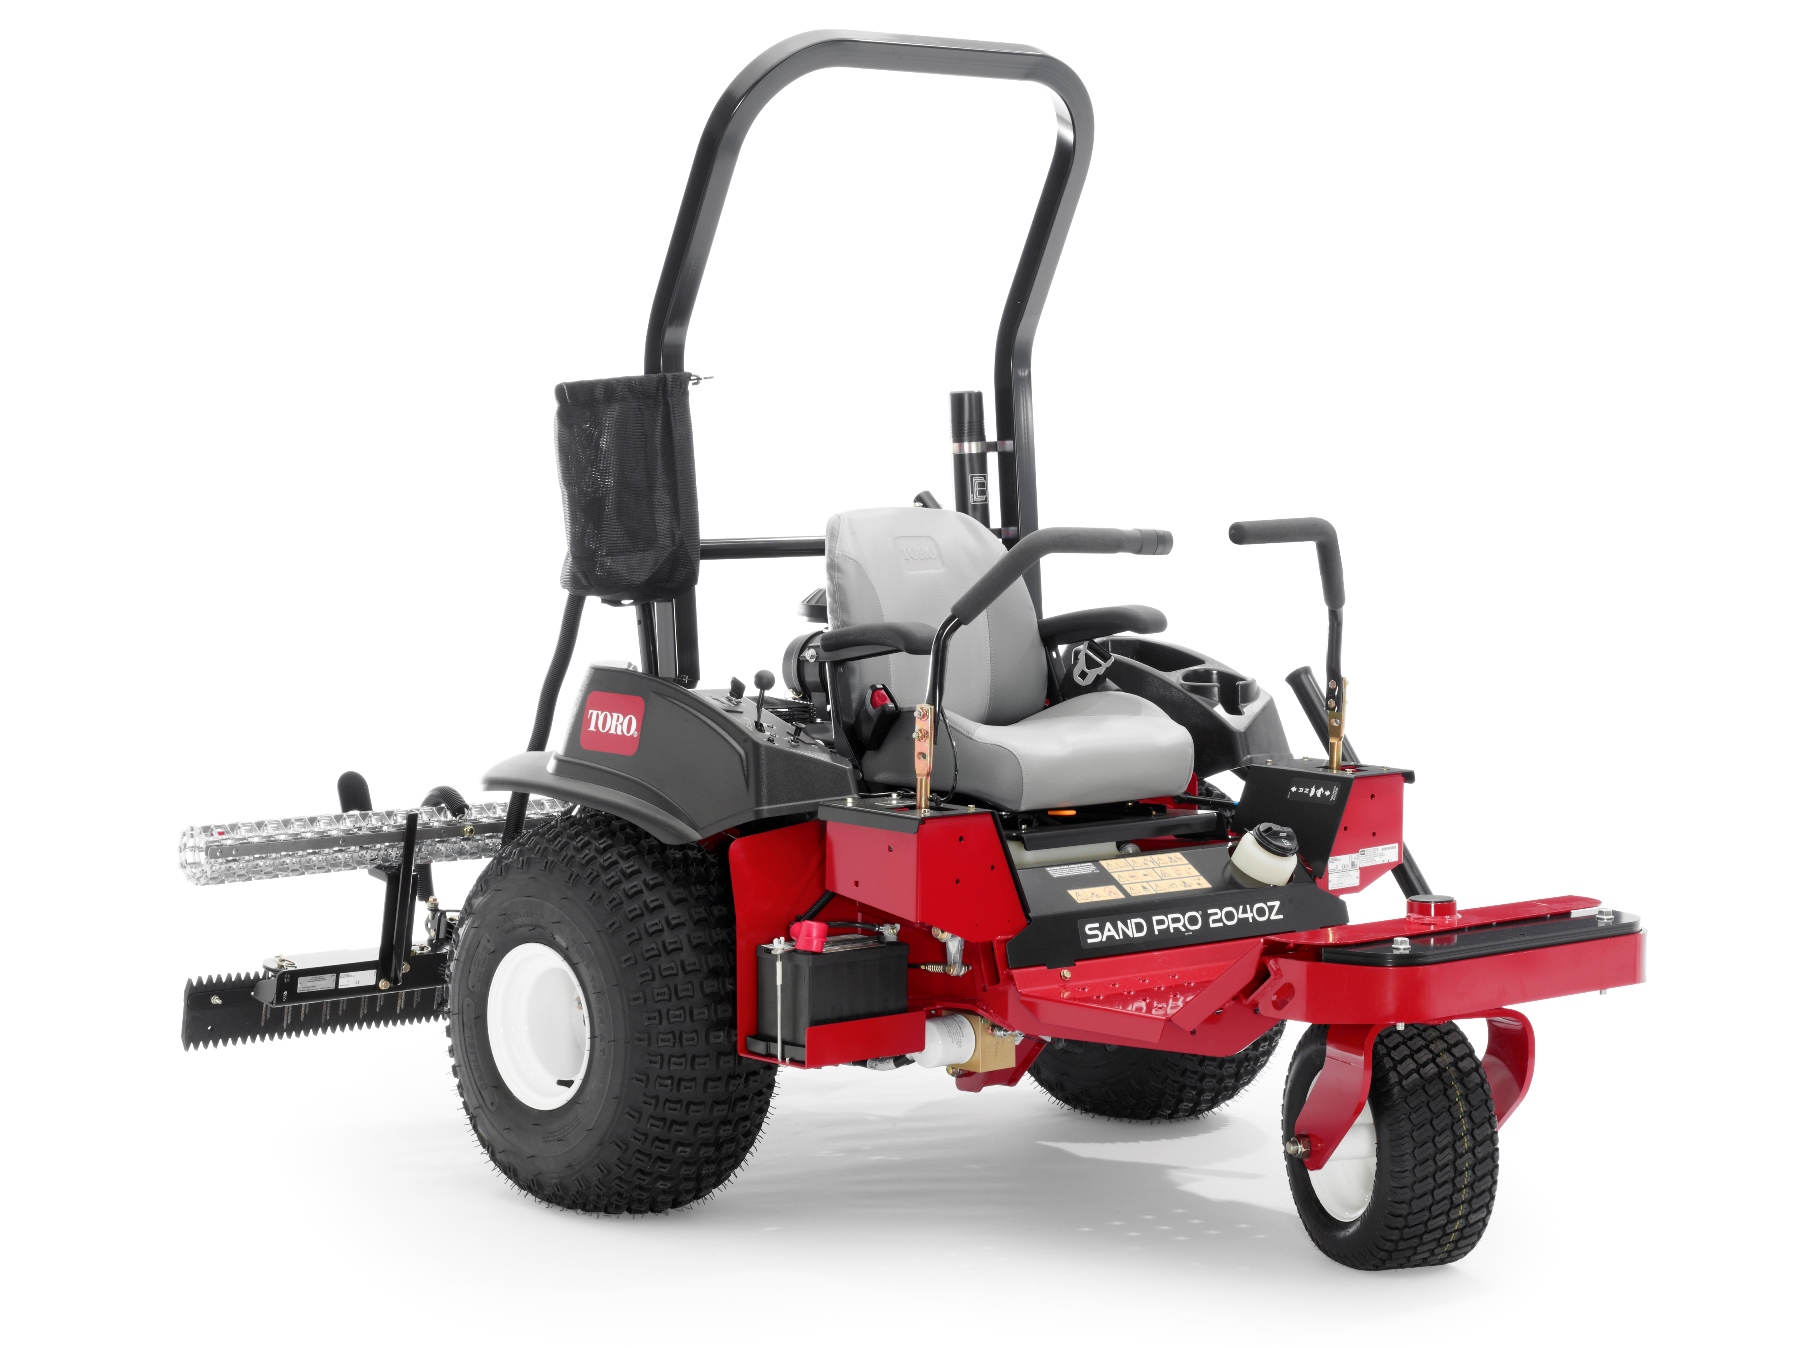 Toro Introduces the All-New Sand Pro® 2040Z